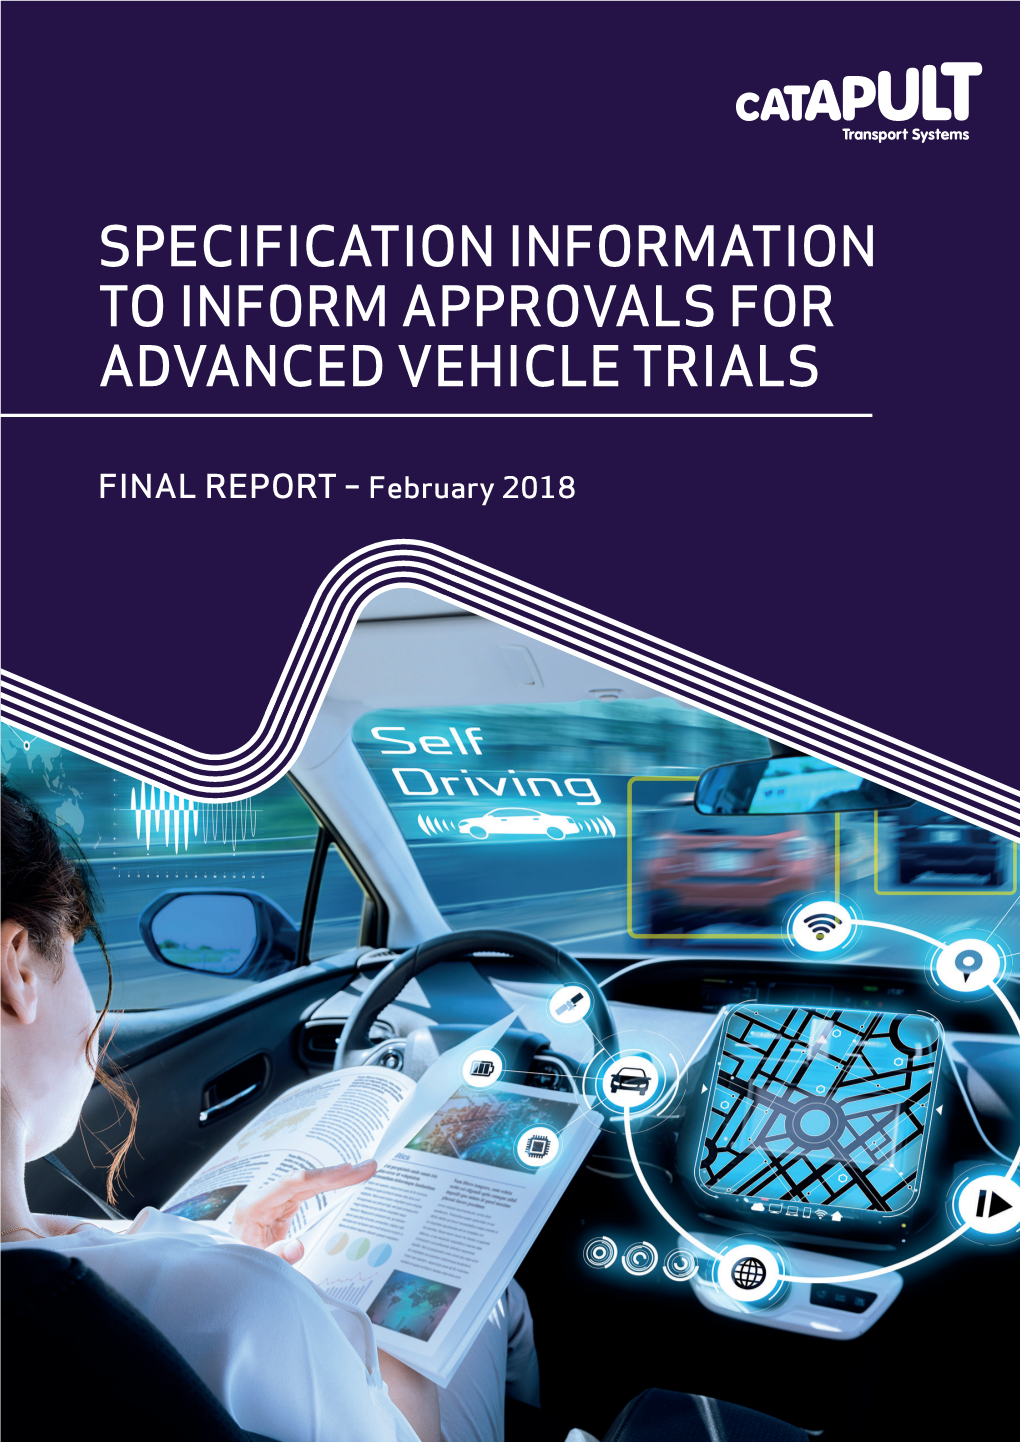 Specification Information to Inform Approvals for Advanced Vehicle Trials